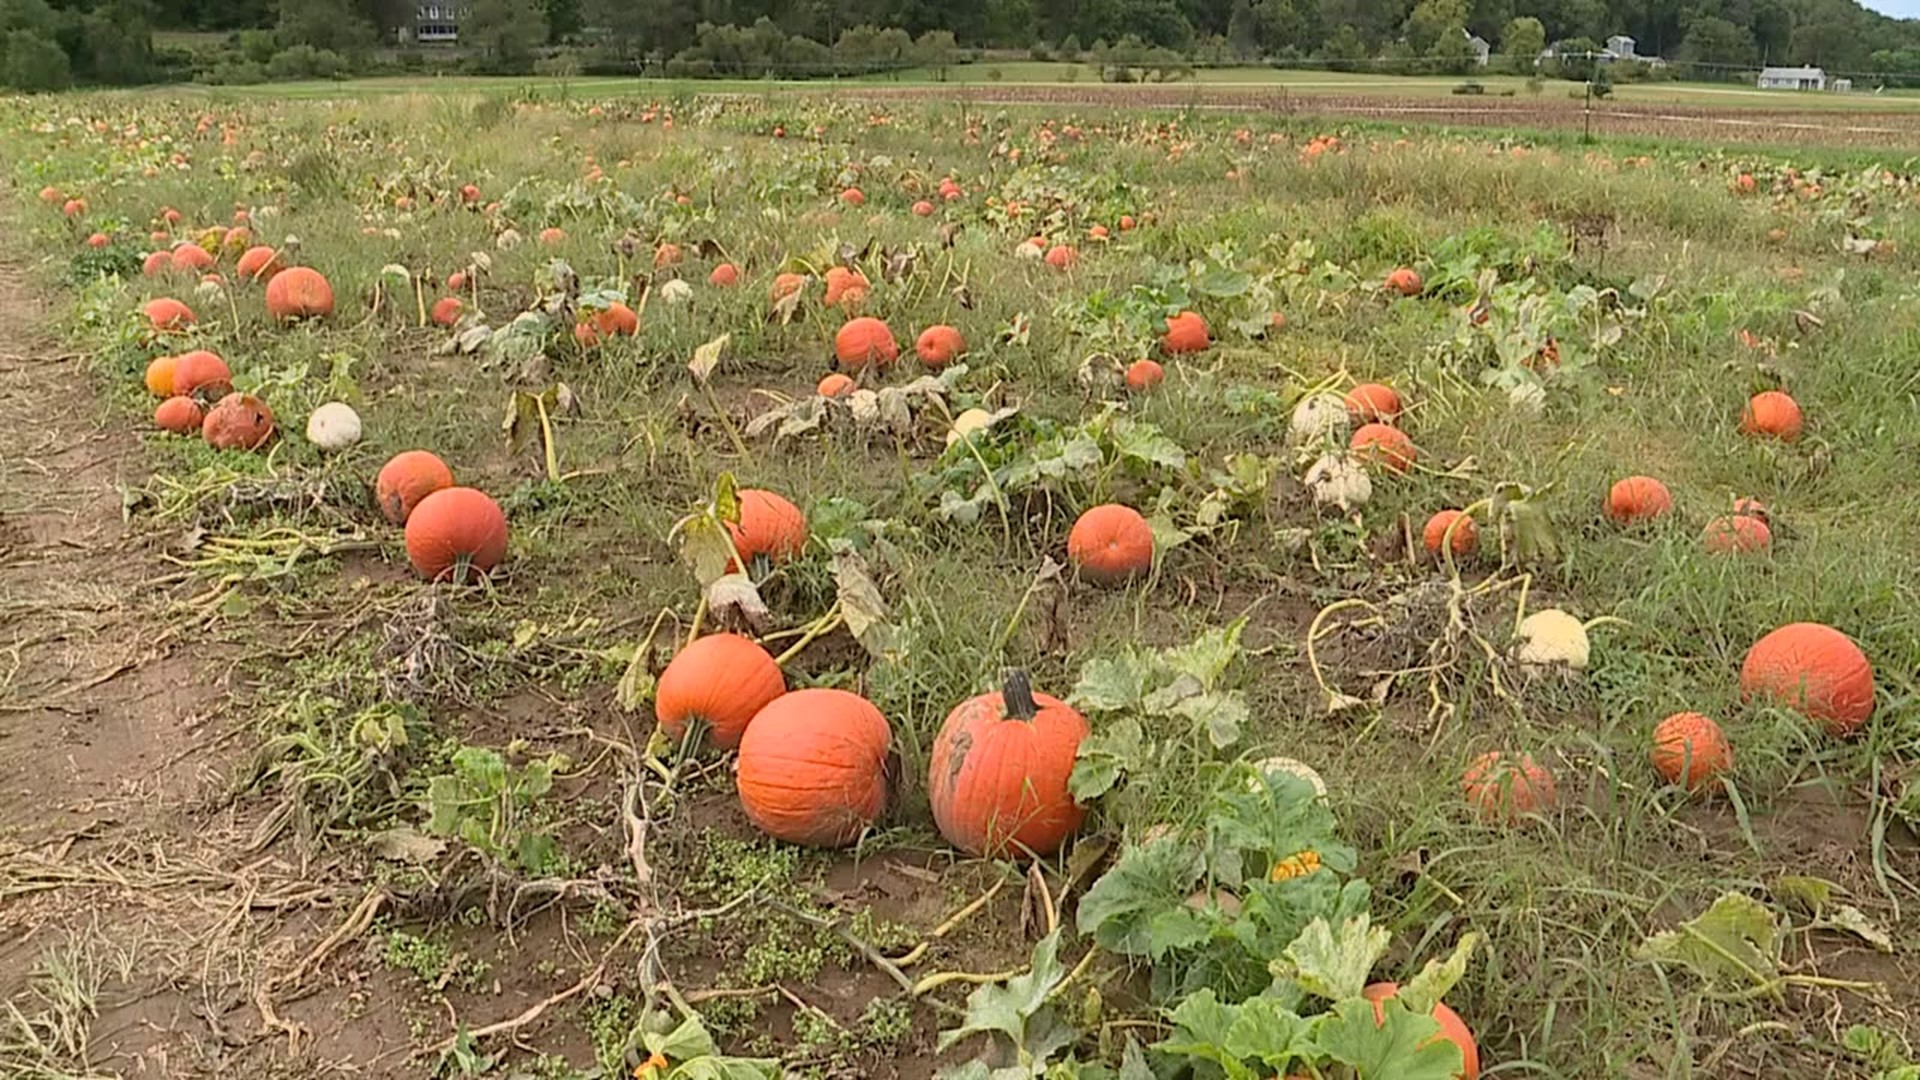 Newswatch 16's Chris Keating stopped by a farm in Lycoming County to explore all the fun on the farm this fall.